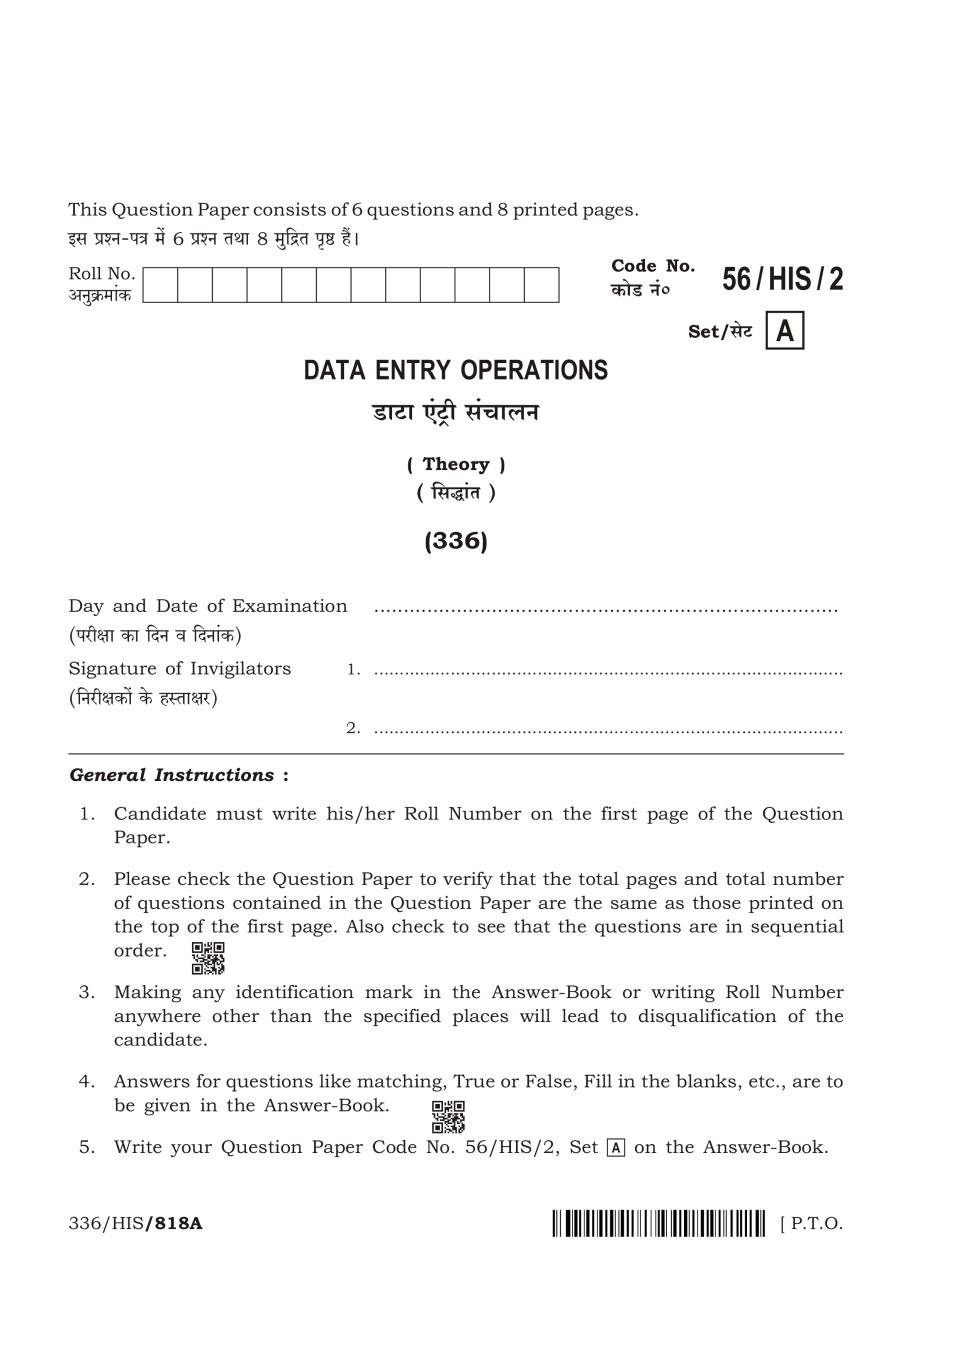 NIOS Class 12 Question Paper Apr 2018 - Data Entry Operations - Page 1